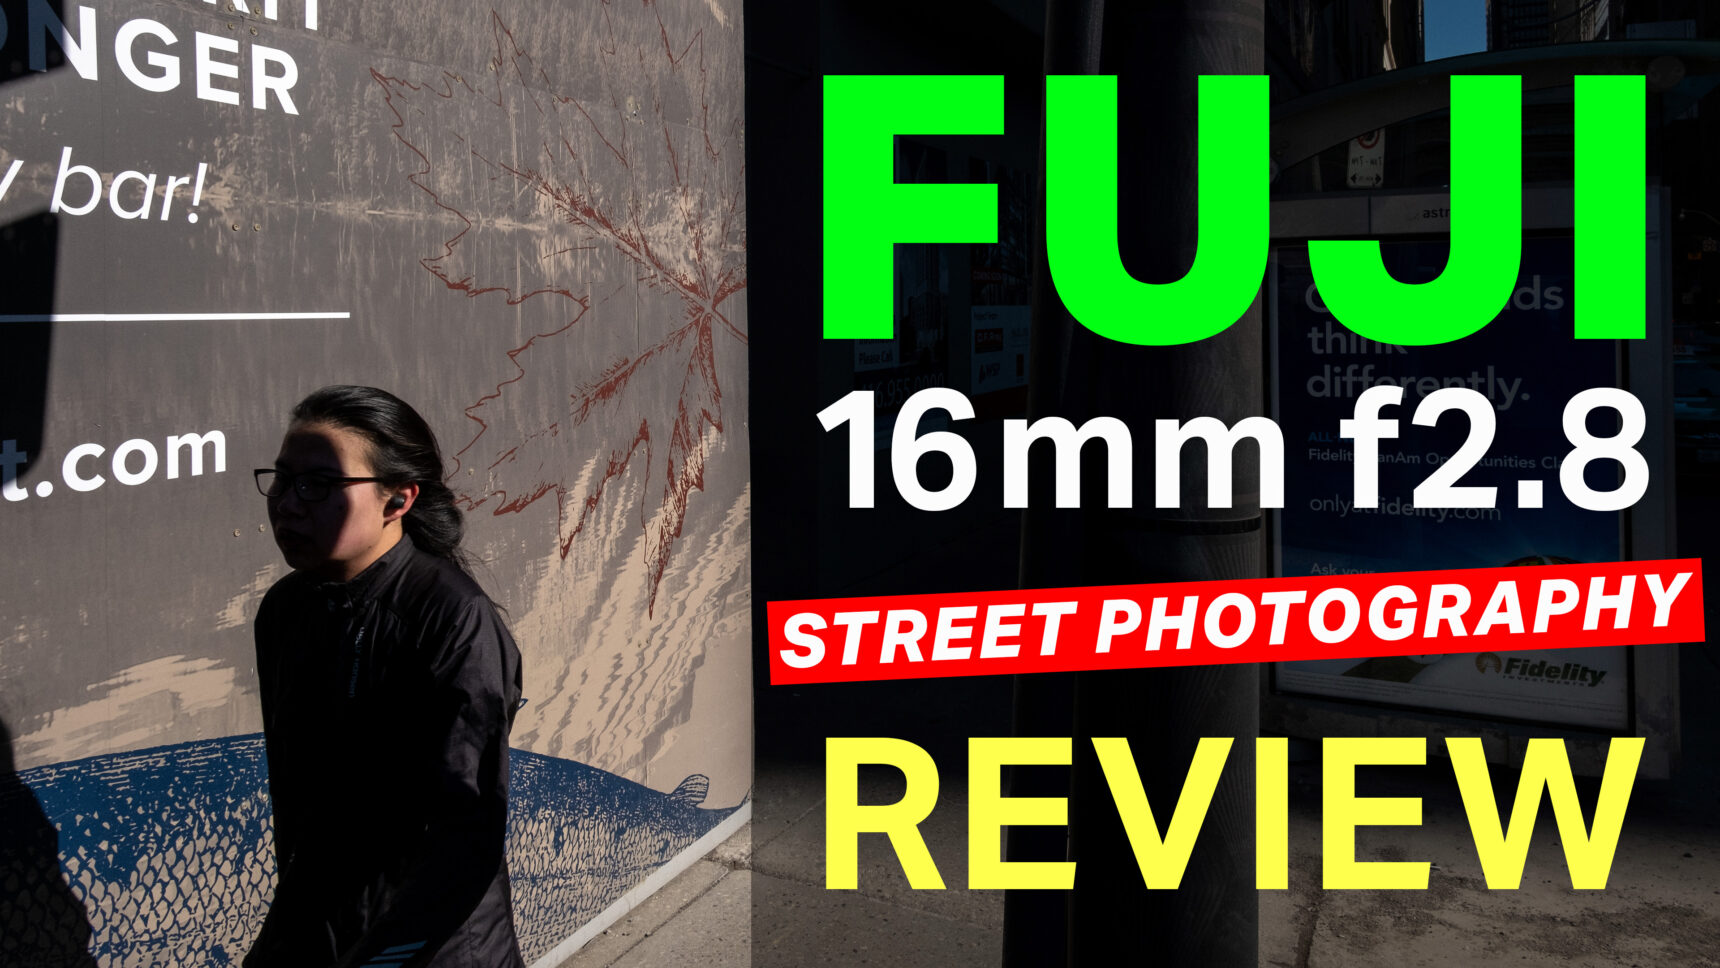 Fuji 16mm f2.8 Street Photography Review - Too Wide For Street?